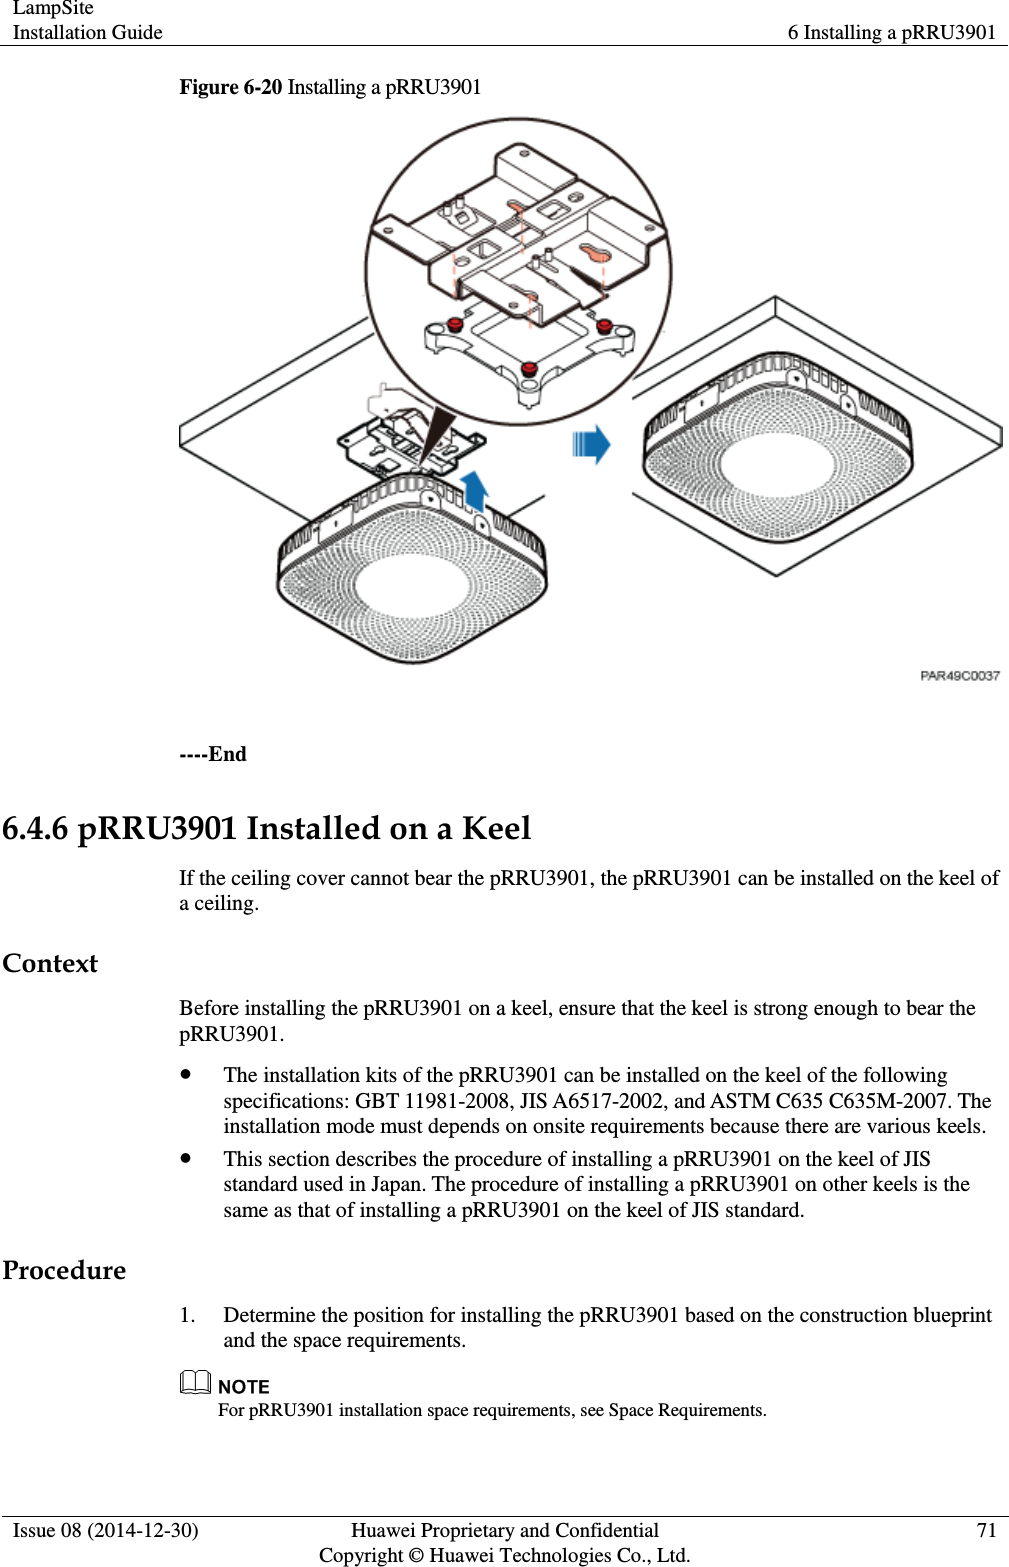 LampSite Installation Guide 6 Installing a pRRU3901  Issue 08 (2014-12-30) Huawei Proprietary and Confidential                                     Copyright © Huawei Technologies Co., Ltd. 71  Figure 6-20 Installing a pRRU3901   ----End 6.4.6 pRRU3901 Installed on a Keel If the ceiling cover cannot bear the pRRU3901, the pRRU3901 can be installed on the keel of a ceiling. Context Before installing the pRRU3901 on a keel, ensure that the keel is strong enough to bear the pRRU3901.  The installation kits of the pRRU3901 can be installed on the keel of the following specifications: GBT 11981-2008, JIS A6517-2002, and ASTM C635 C635M-2007. The installation mode must depends on onsite requirements because there are various keels.  This section describes the procedure of installing a pRRU3901 on the keel of JIS standard used in Japan. The procedure of installing a pRRU3901 on other keels is the same as that of installing a pRRU3901 on the keel of JIS standard. Procedure 1. Determine the position for installing the pRRU3901 based on the construction blueprint and the space requirements.  For pRRU3901 installation space requirements, see Space Requirements. 